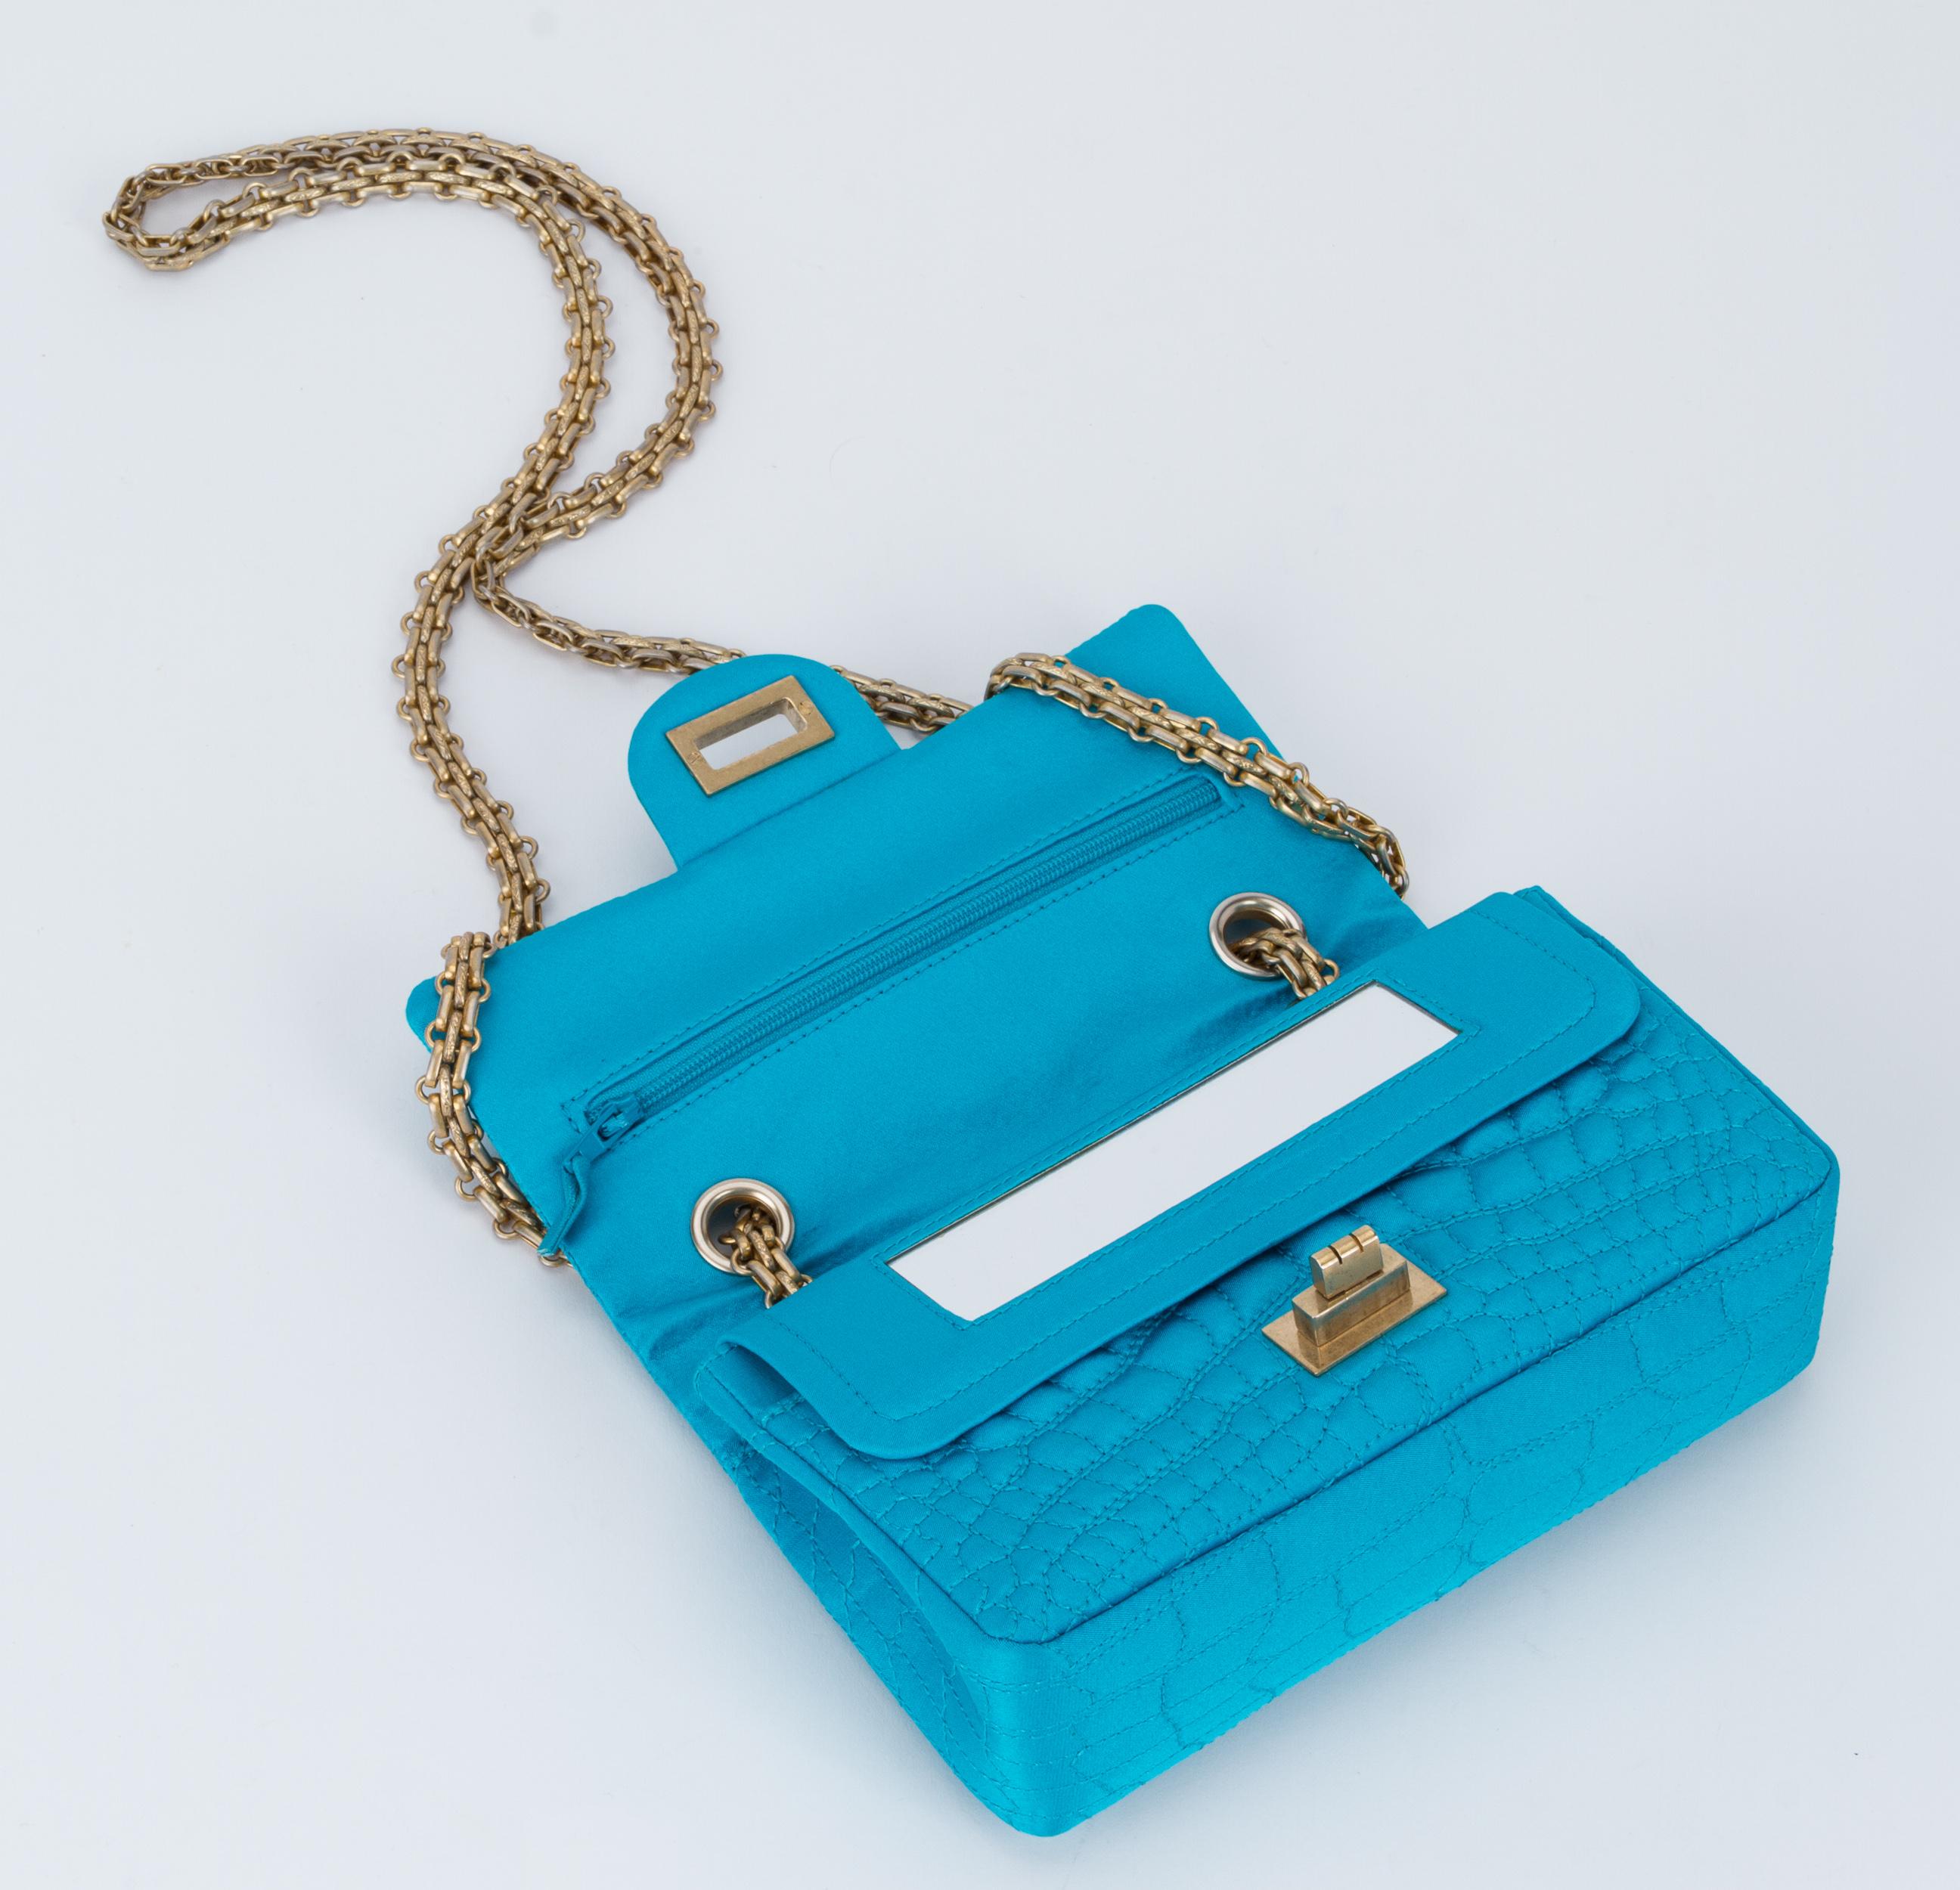 Chanel Silk Croc Embossed Turquoise Flap Bag 5